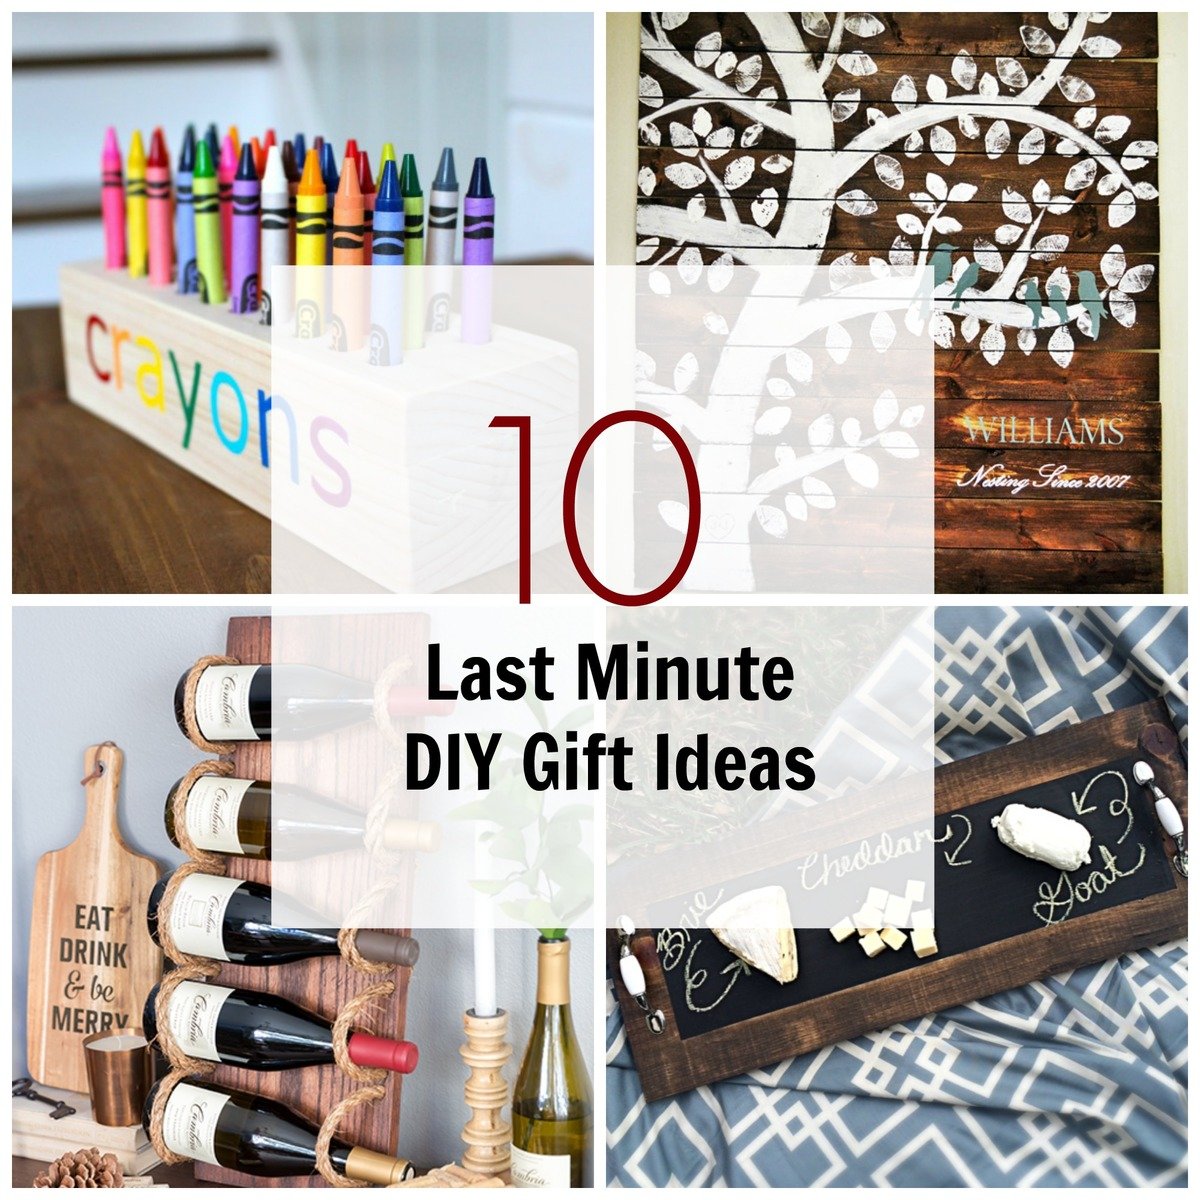 10 Easy DIY Gifts You Can Make in Under an Hour - CousinDIY